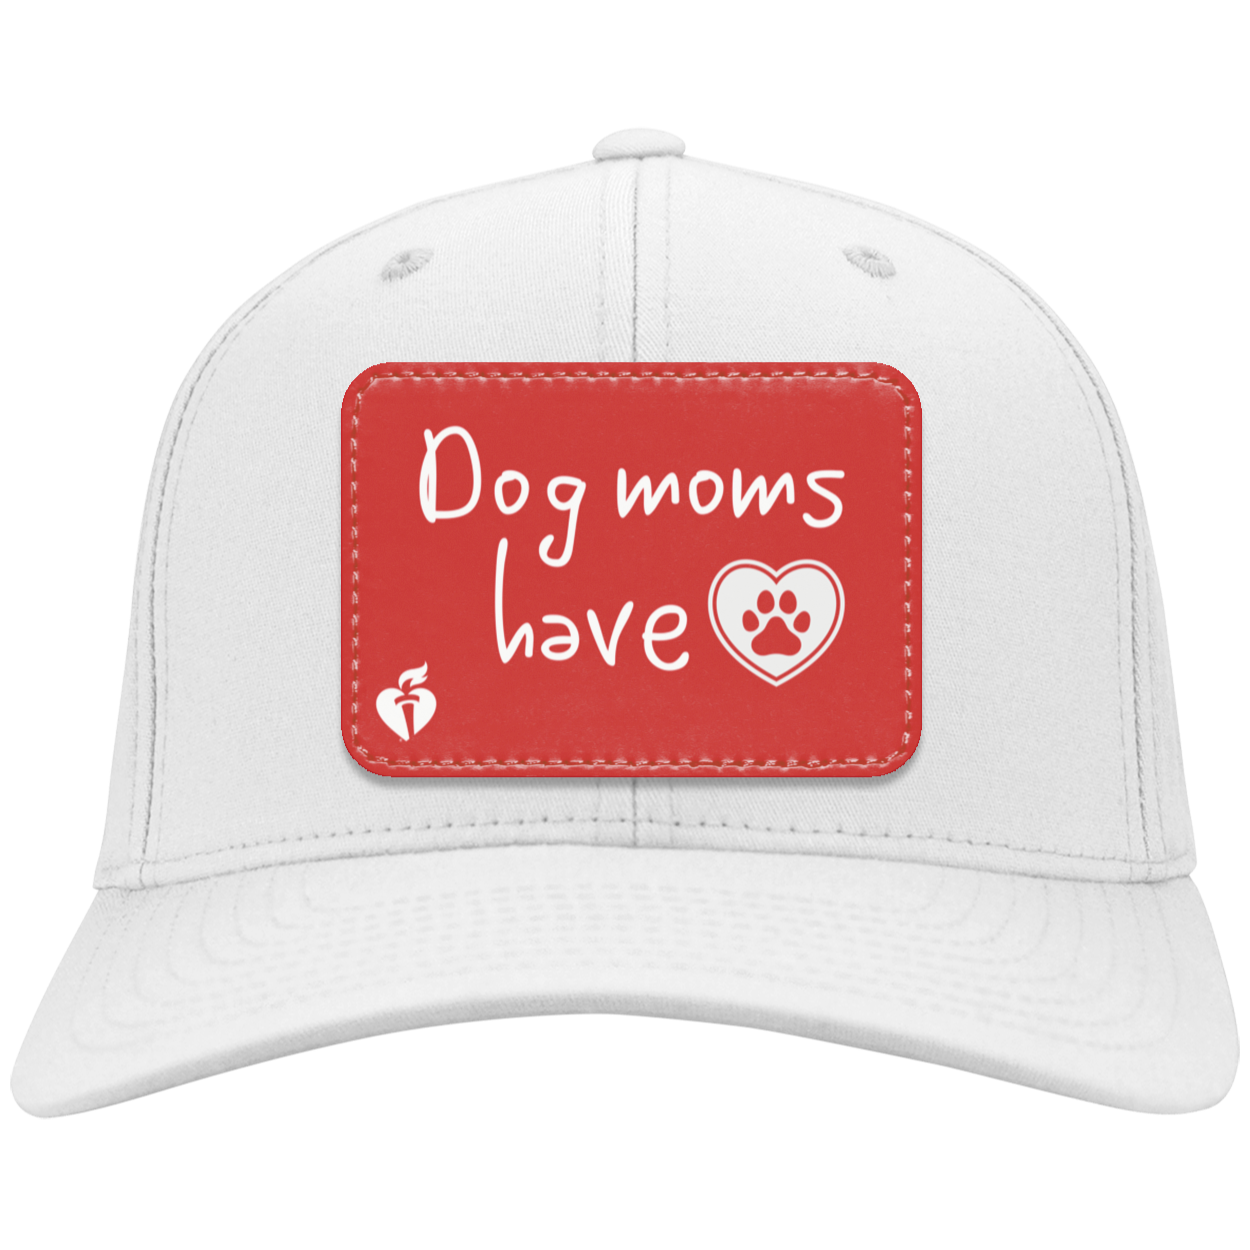 white cap with red vegan leather patch that says "Dog moms have heart" . A heart with a paw print inside and heart and torch logo.